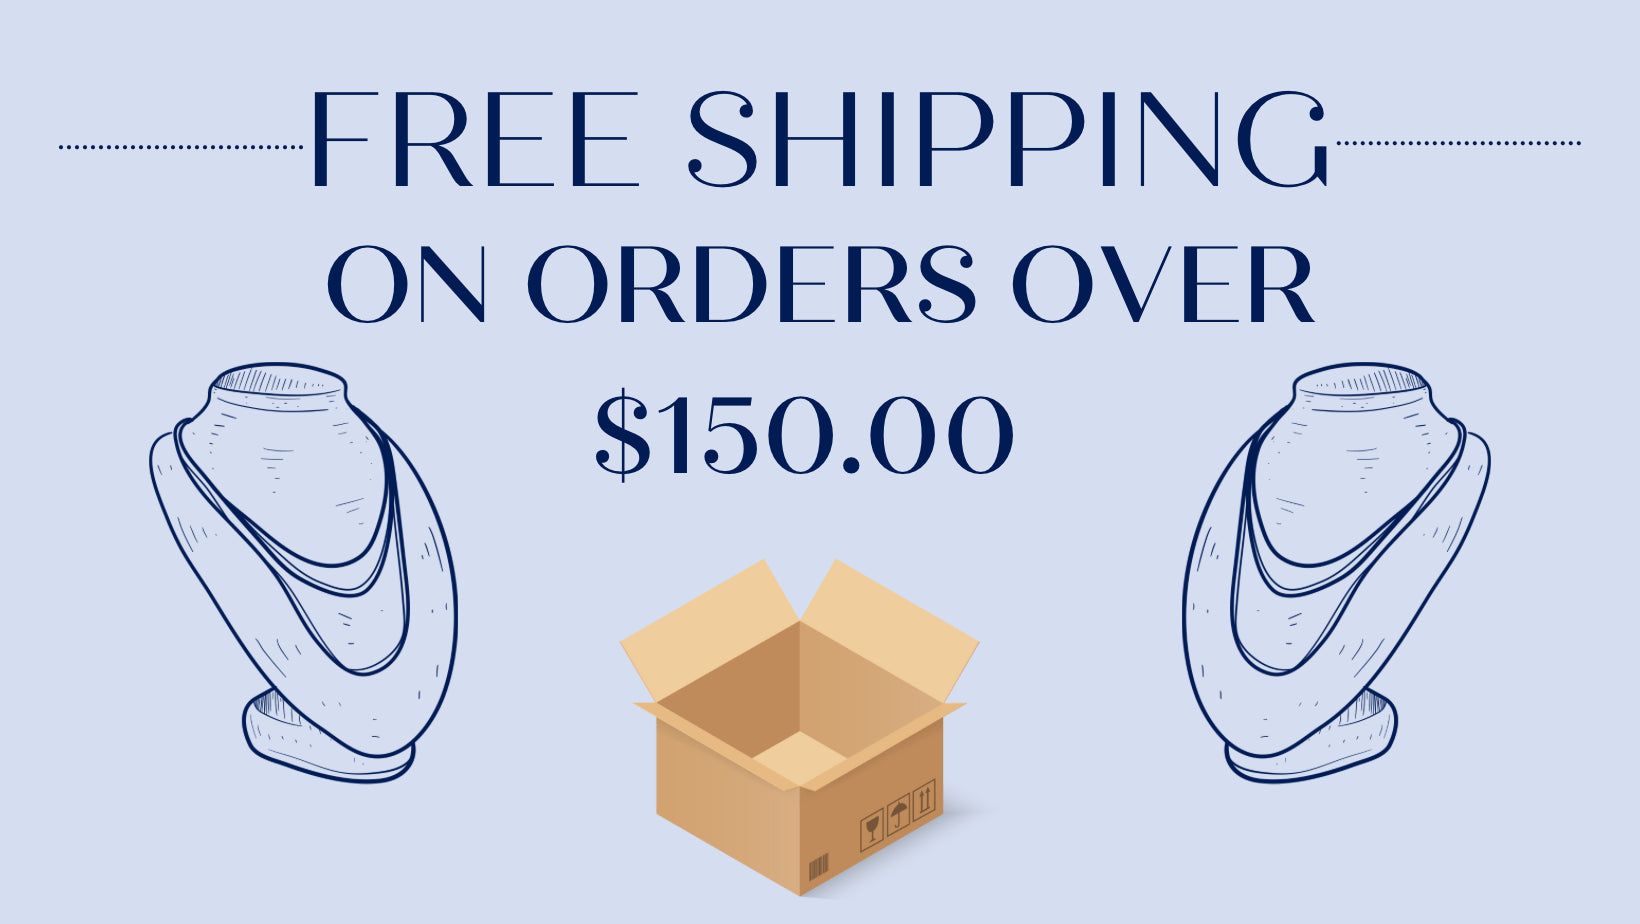 Free Shipping on Order Over $150.00